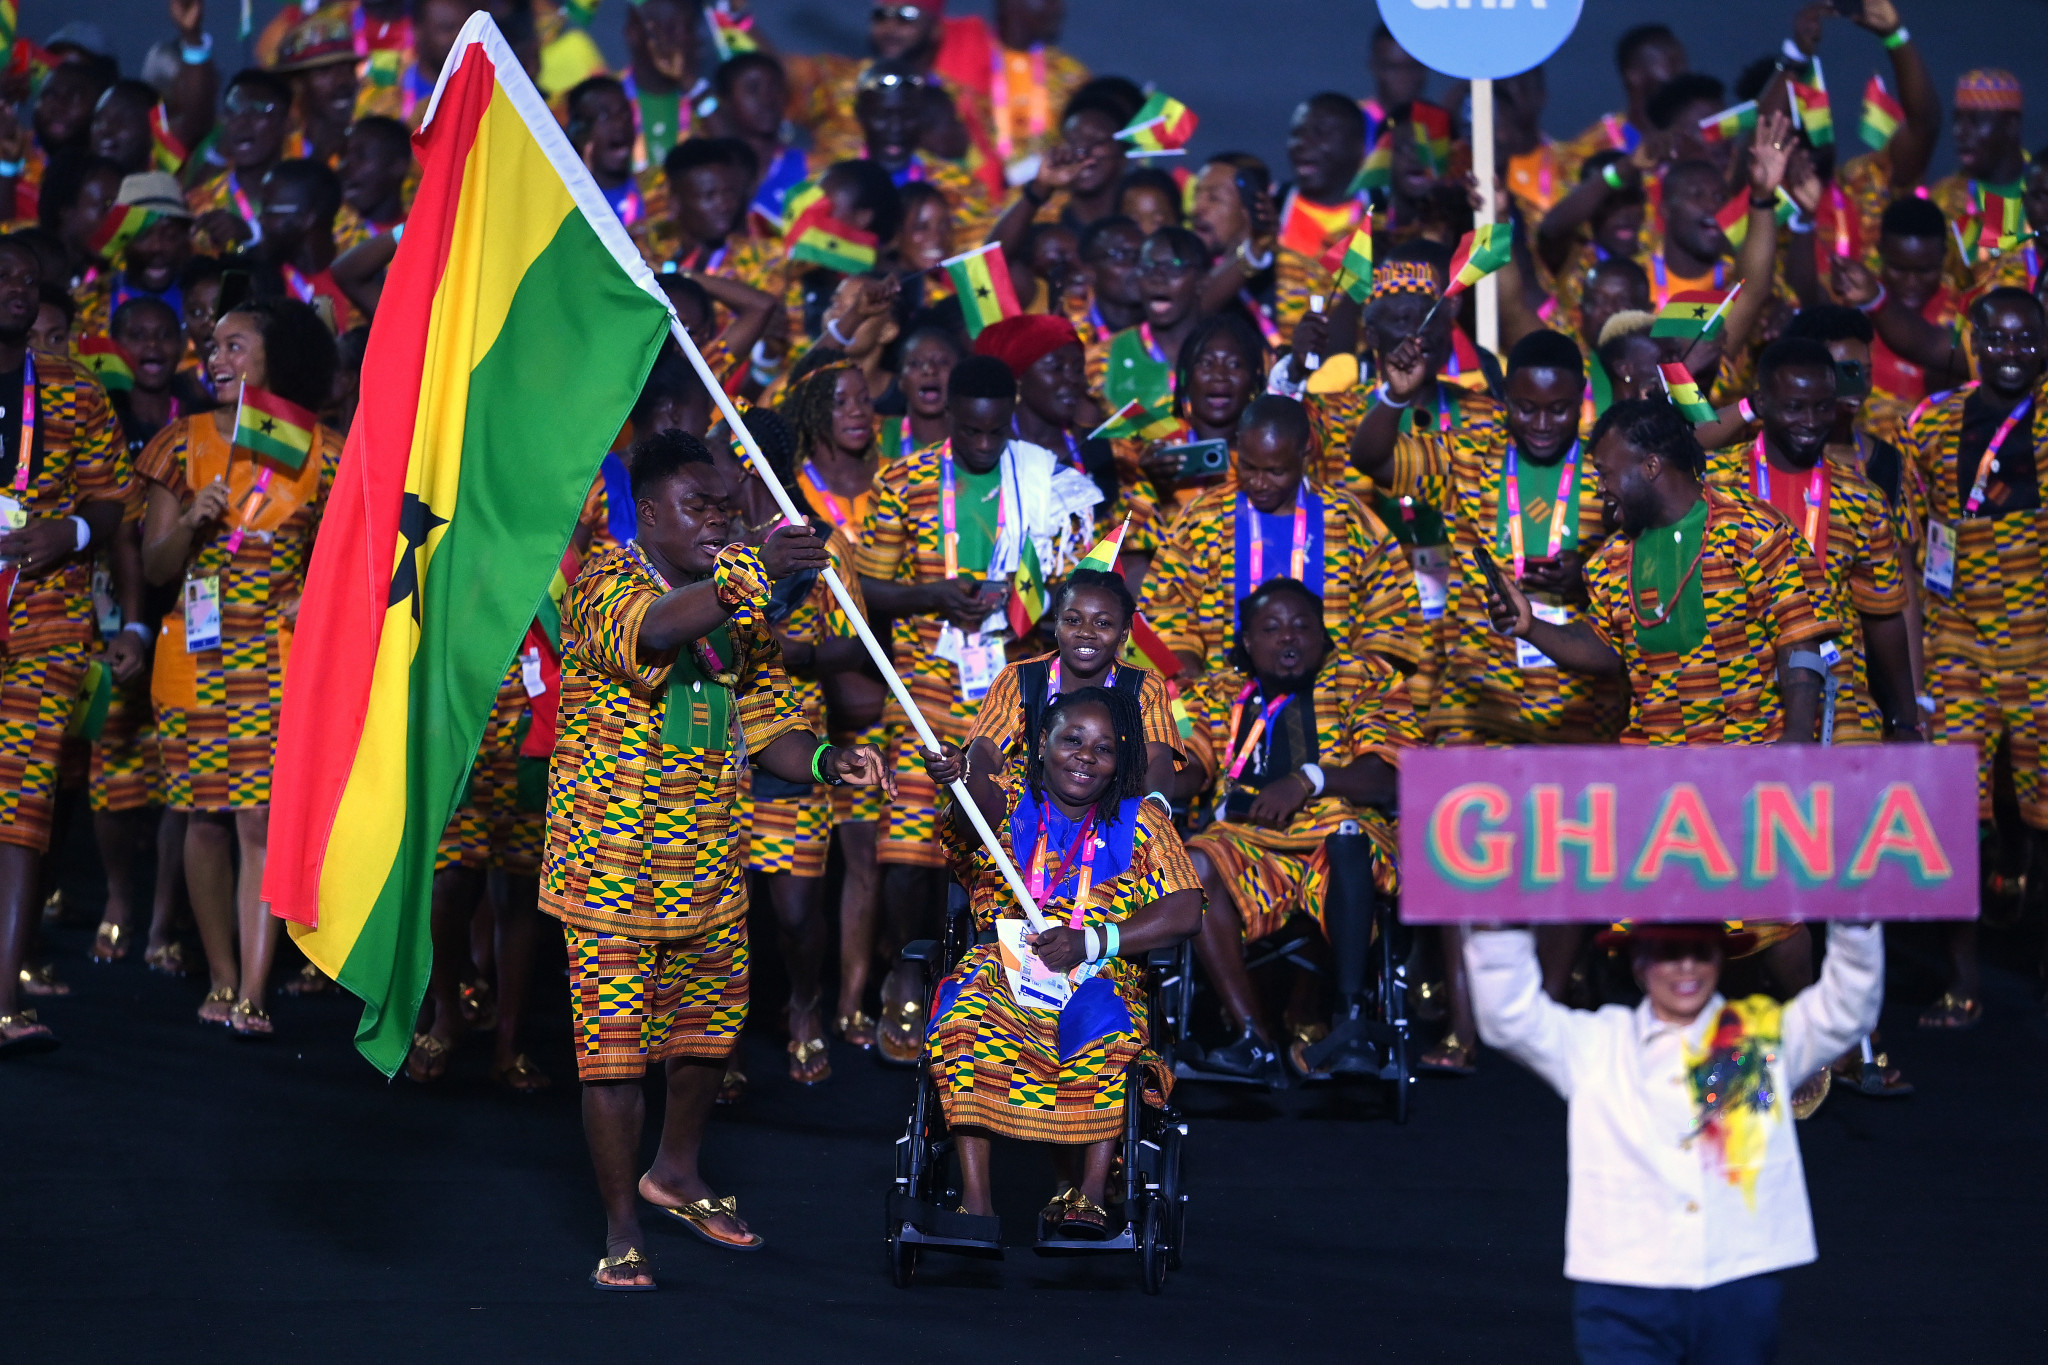 Accra 2023 chair promises delayed African Games will take place "without failure"